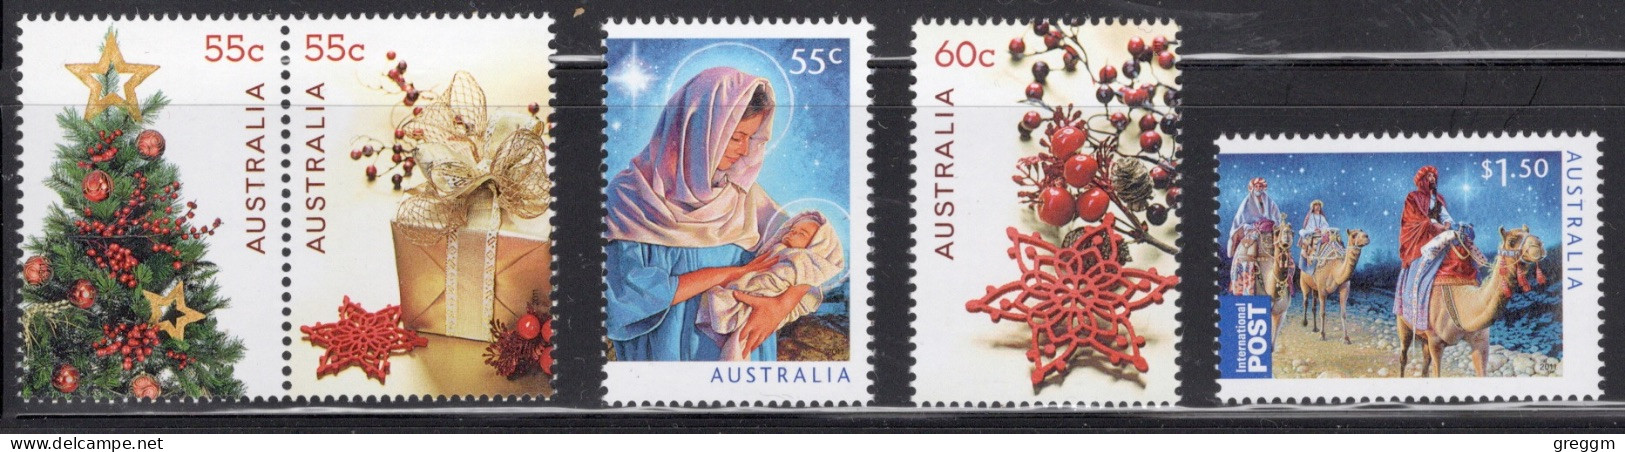 Australia 2011 Stamp Celebrating Christmas In Unmounted Mint Condition. - Mint Stamps